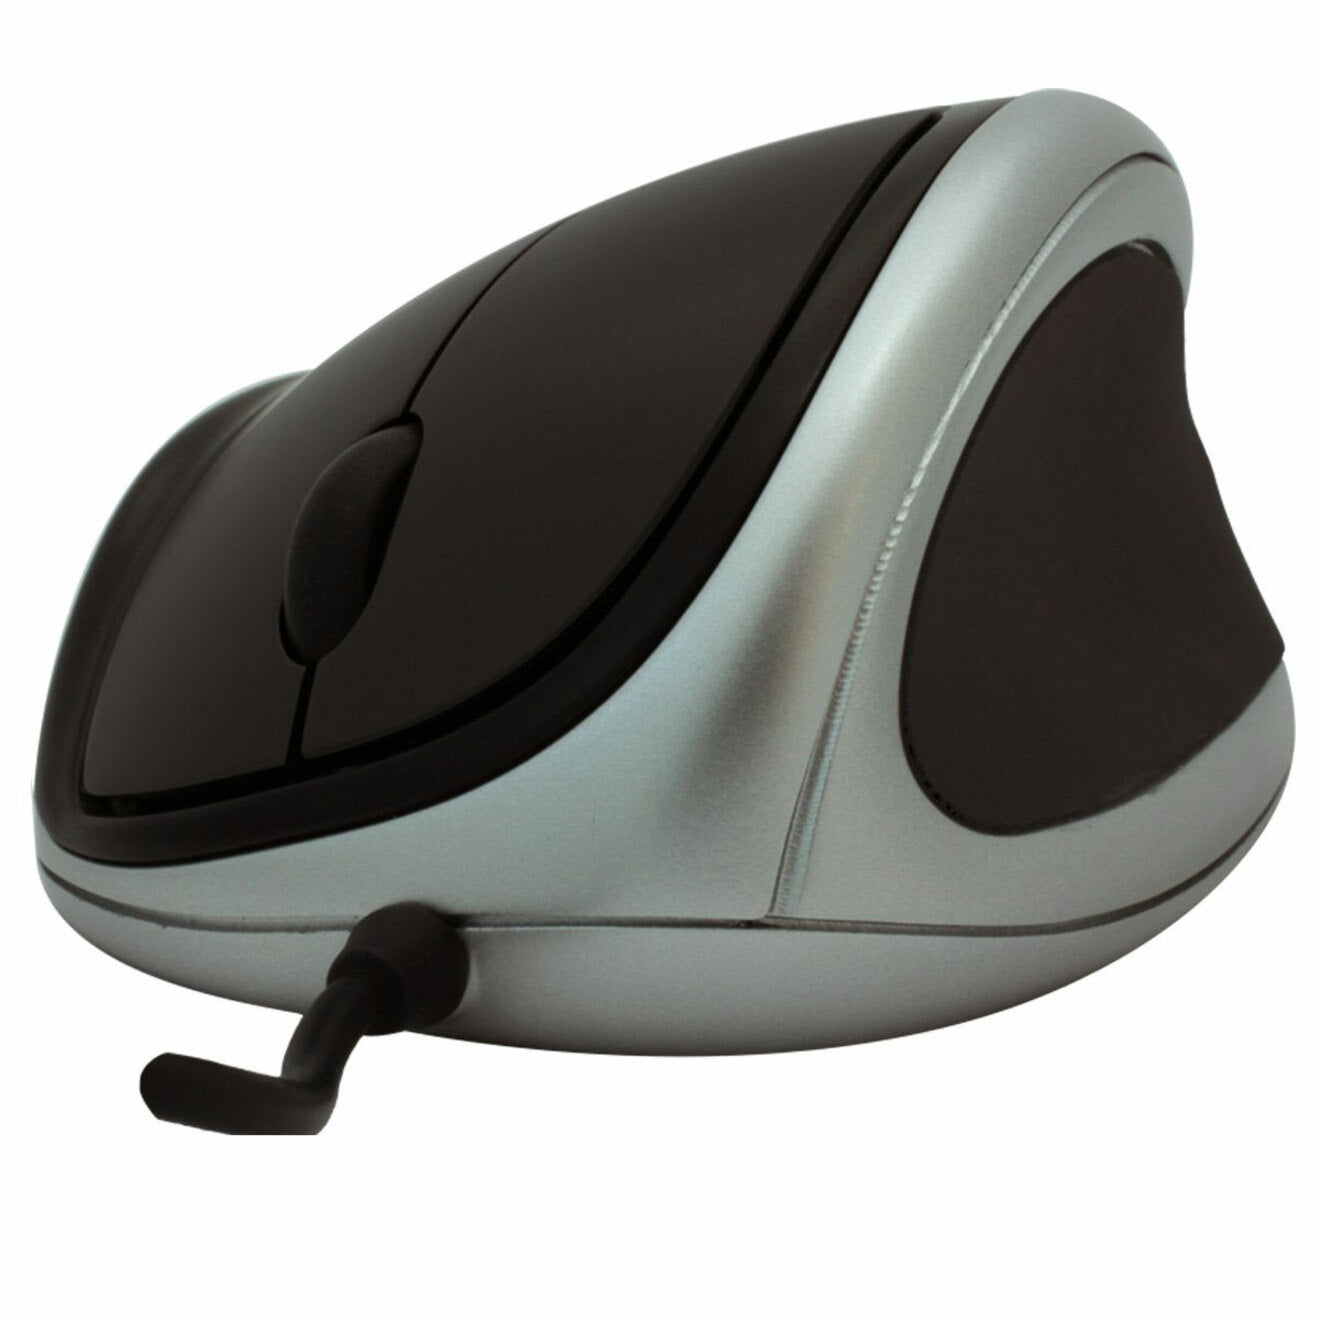 Goldtouch KOV-GTM-R Ergonomic Mouse Right Hand USB Corded, 1000 DPI Optical Scroll Wheel